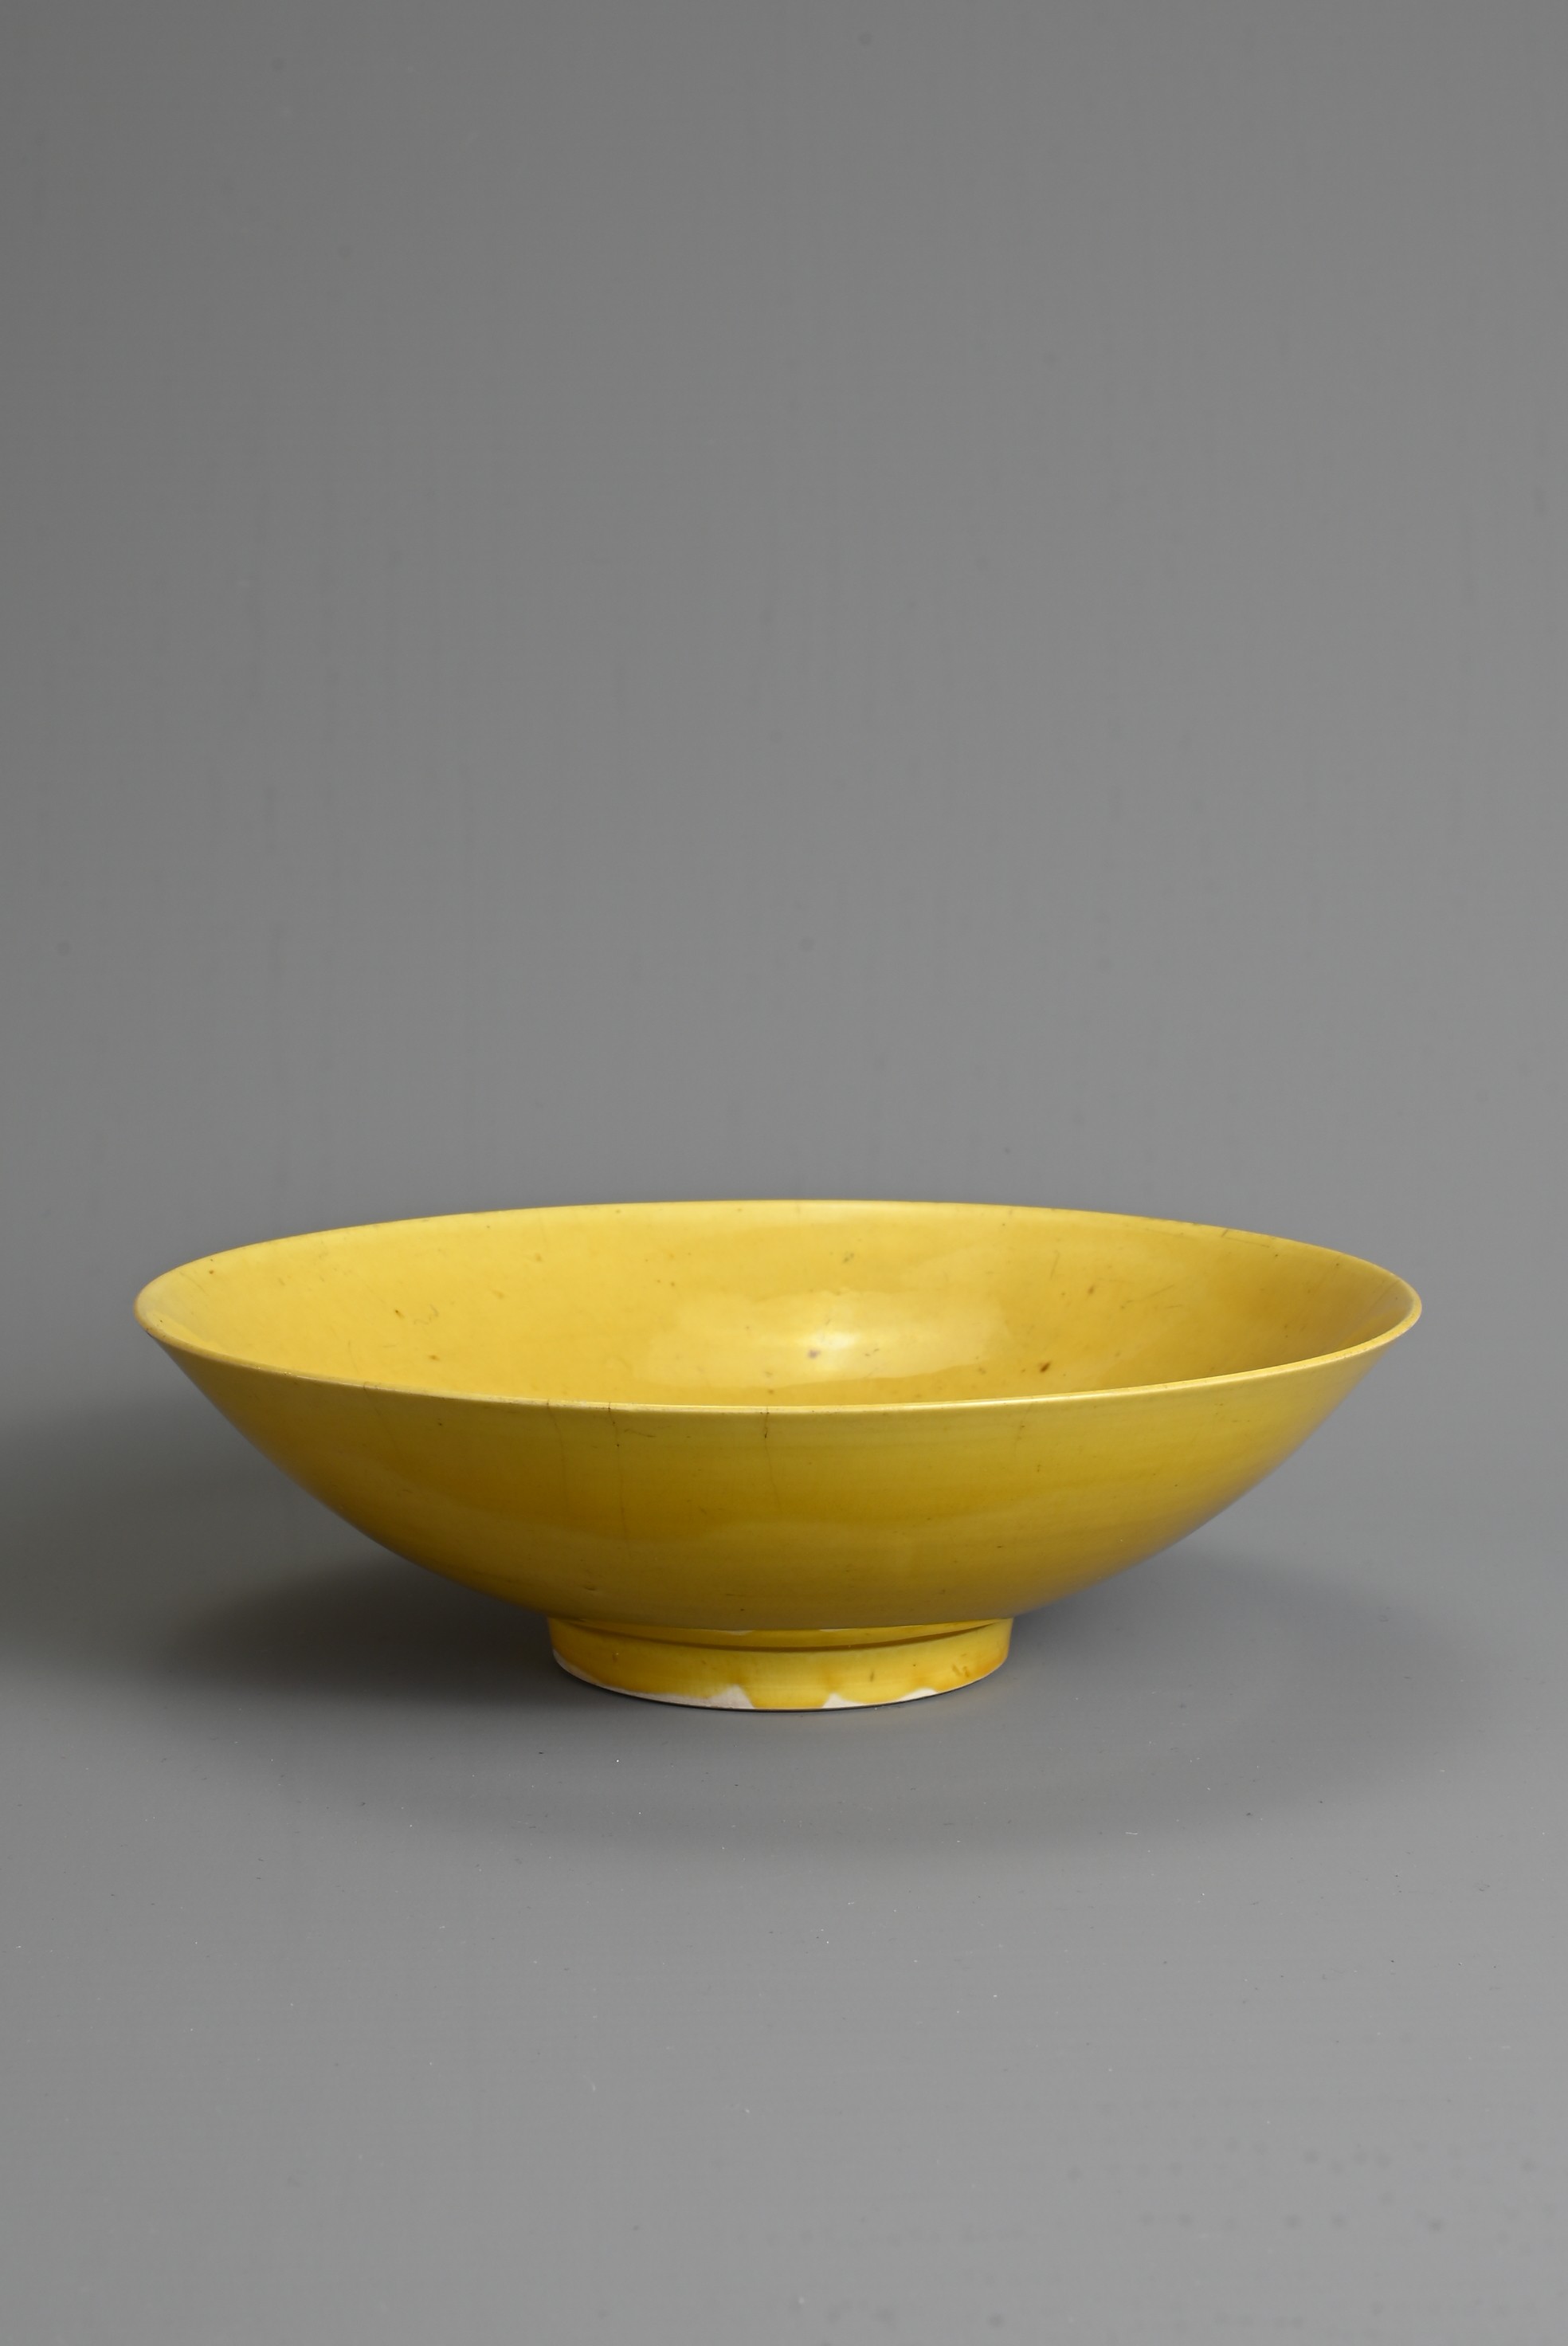 A RARE CHINESE YELLOW GLAZED PORCELAIN SHALLOW BOWL, MARK AND PERIOD OF JIAJING (1522-1566). - Image 3 of 19